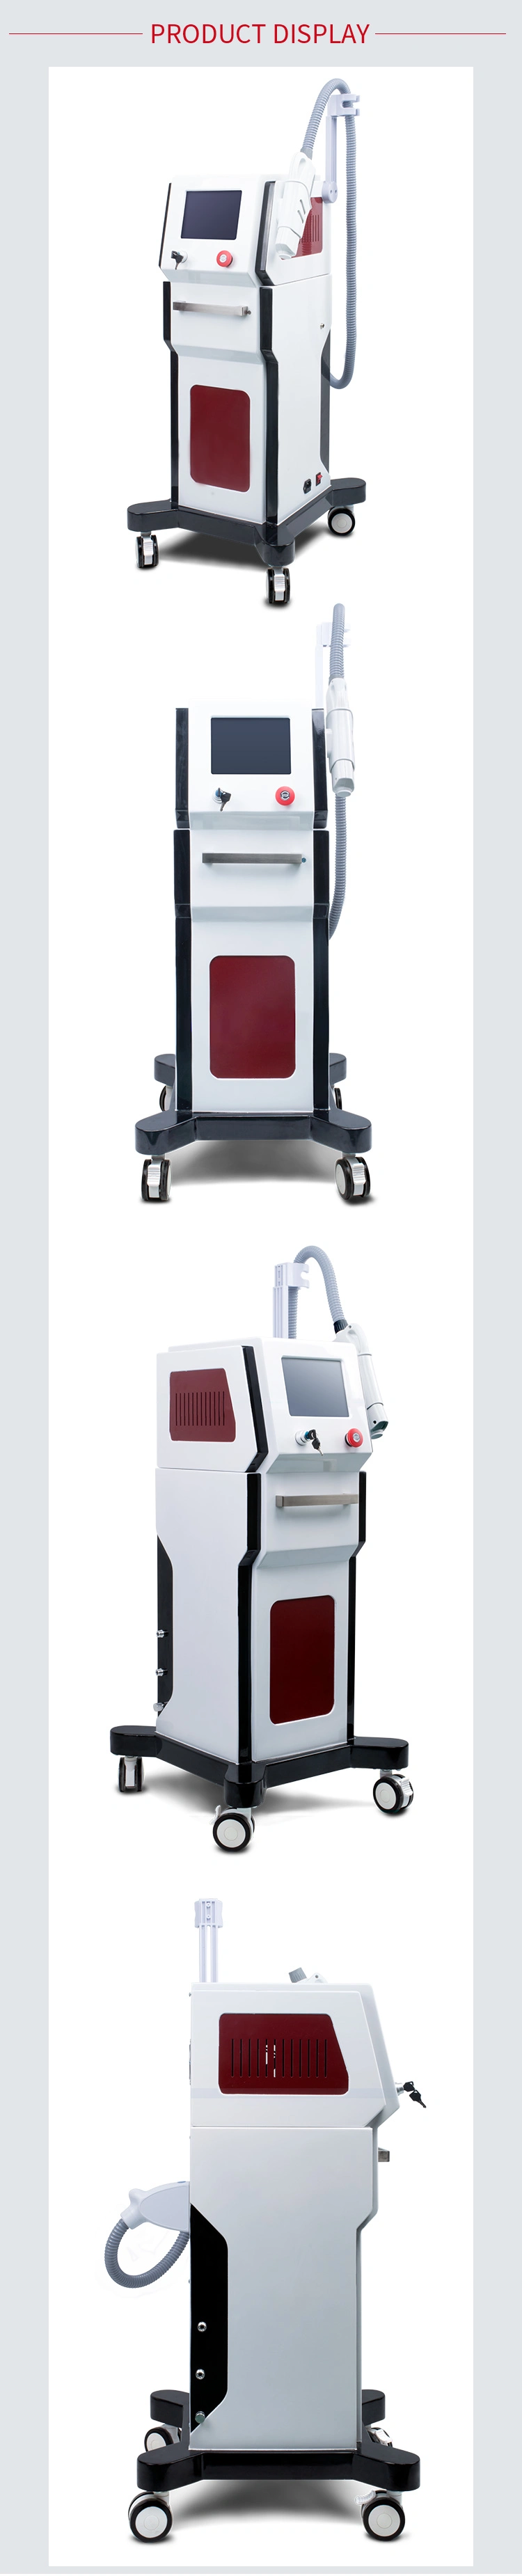 ND YAG Laser Tattoo Removal Device Acne Scar Removal Machine